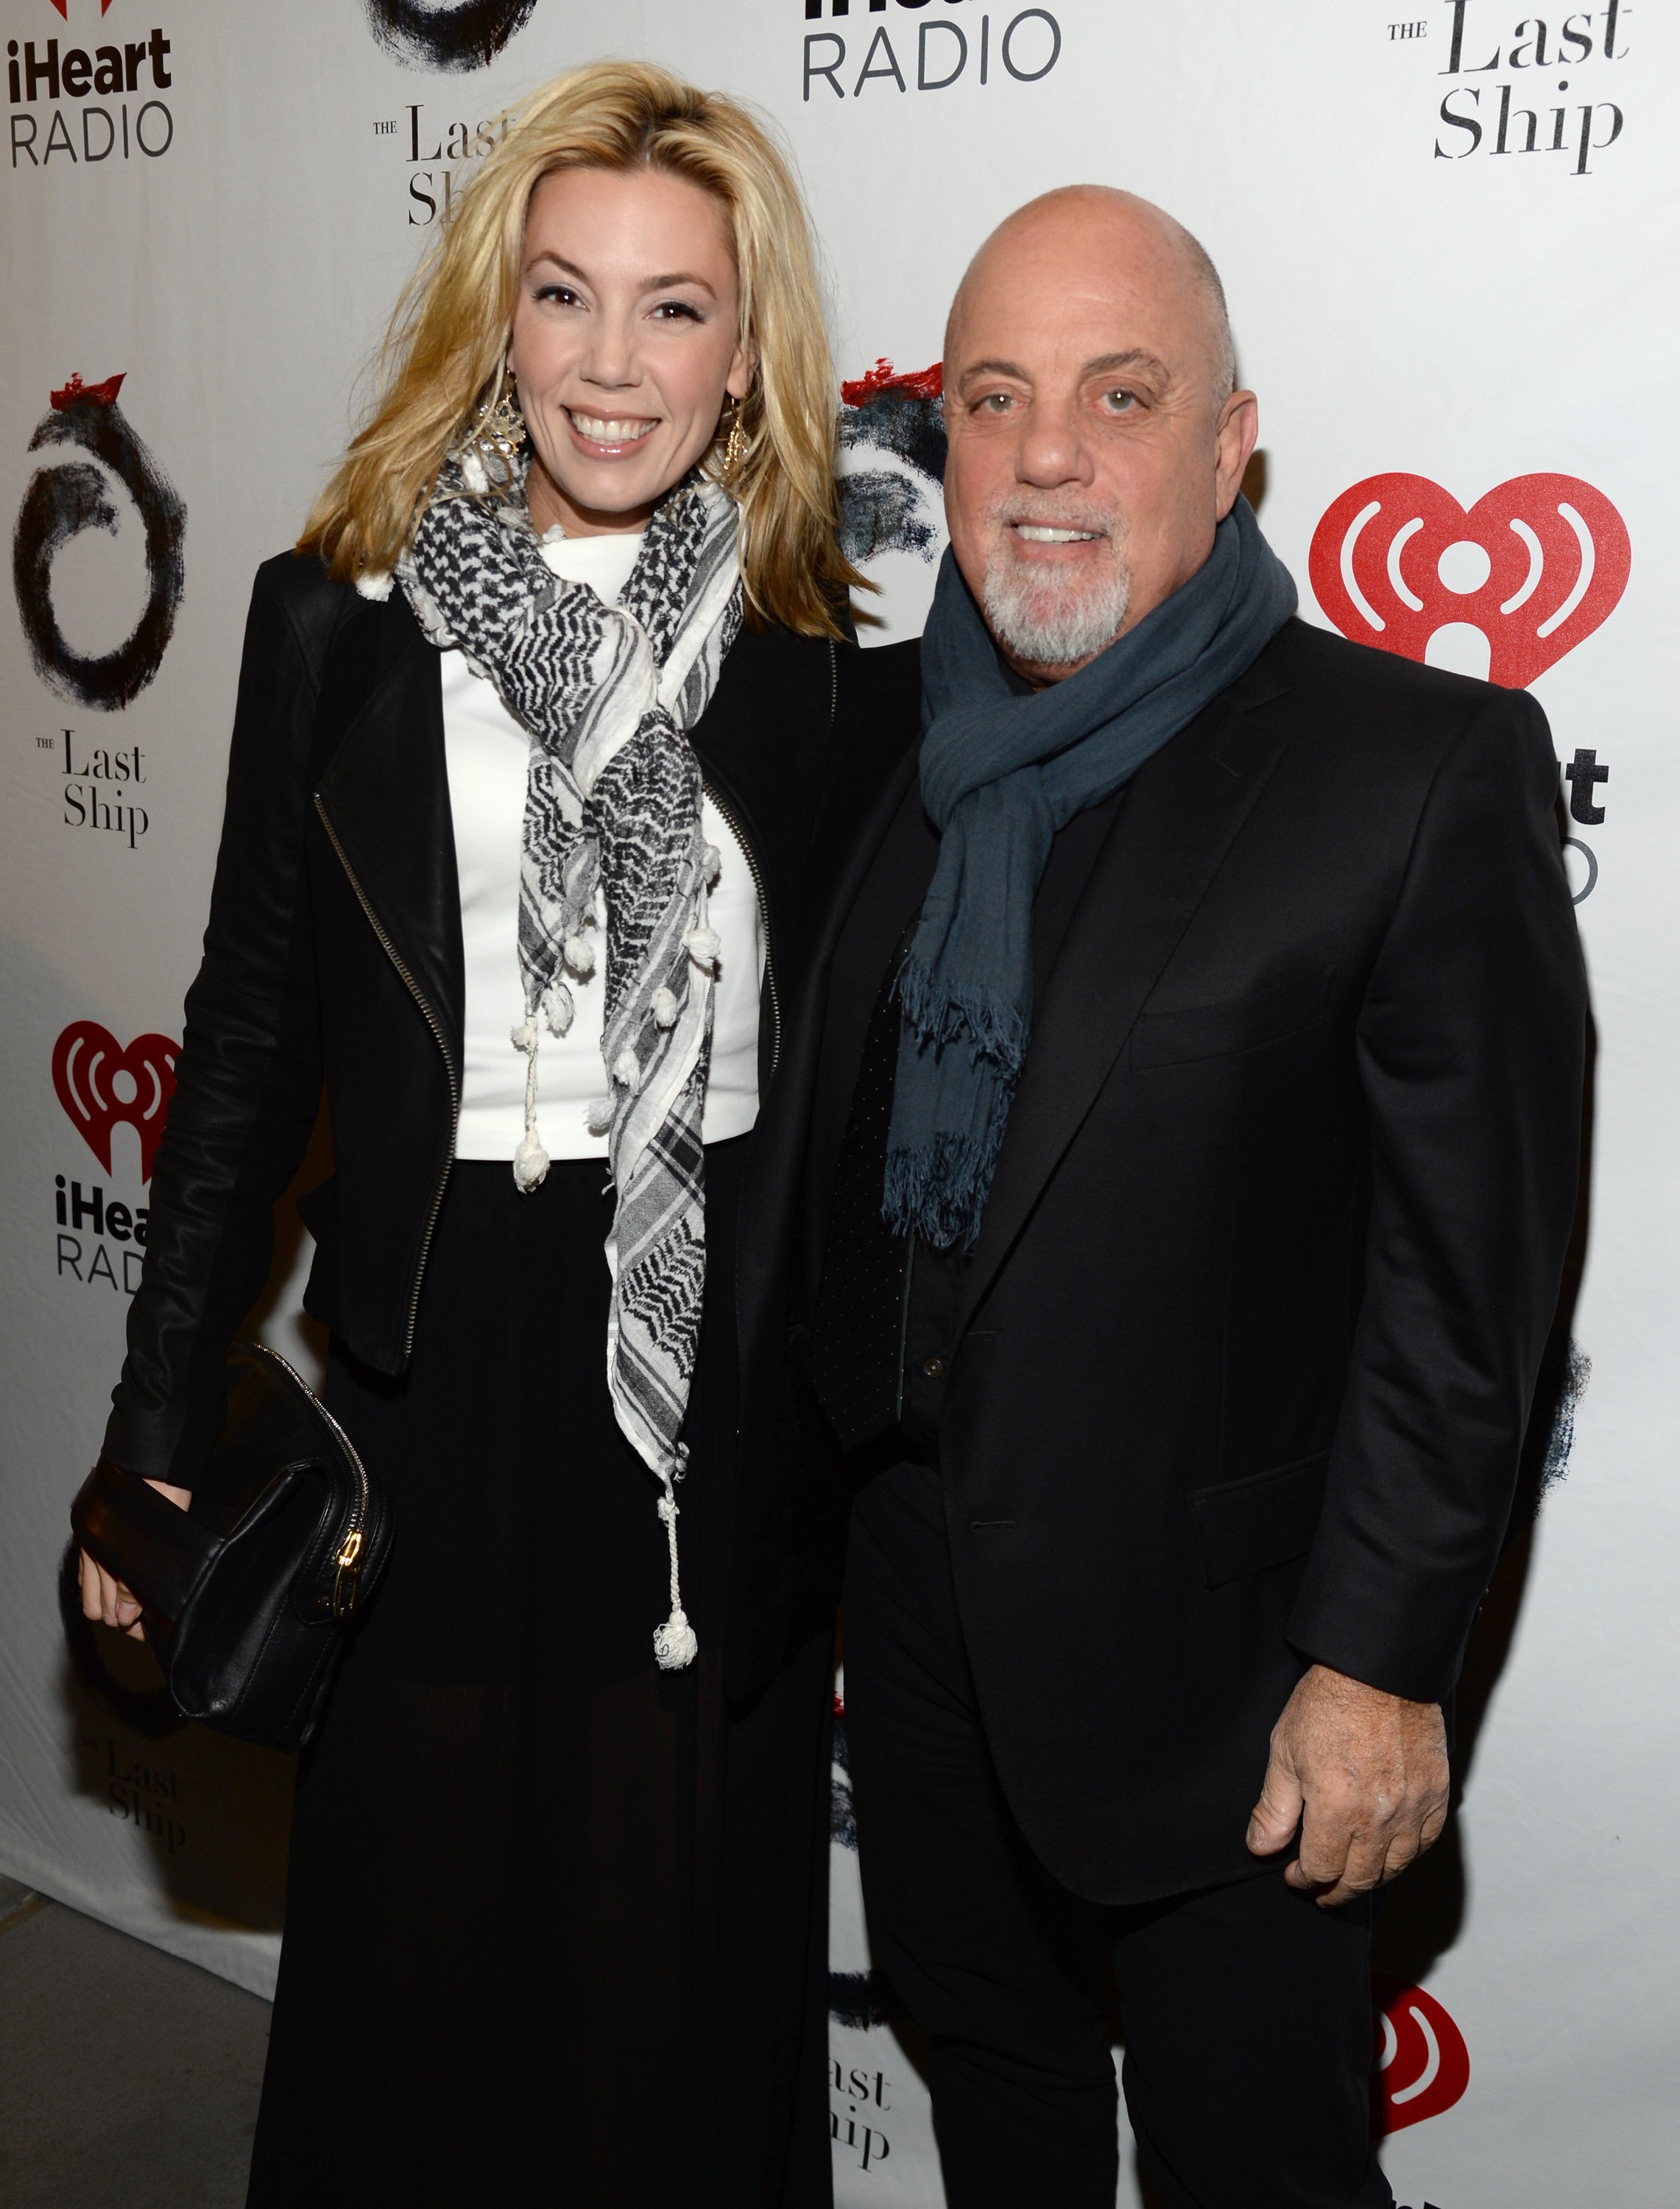  Alexis Roderick and Billy Joel at "The Last Ship" broadway opening nigh on October 26, 2014, in New York City | Source: Getty Images